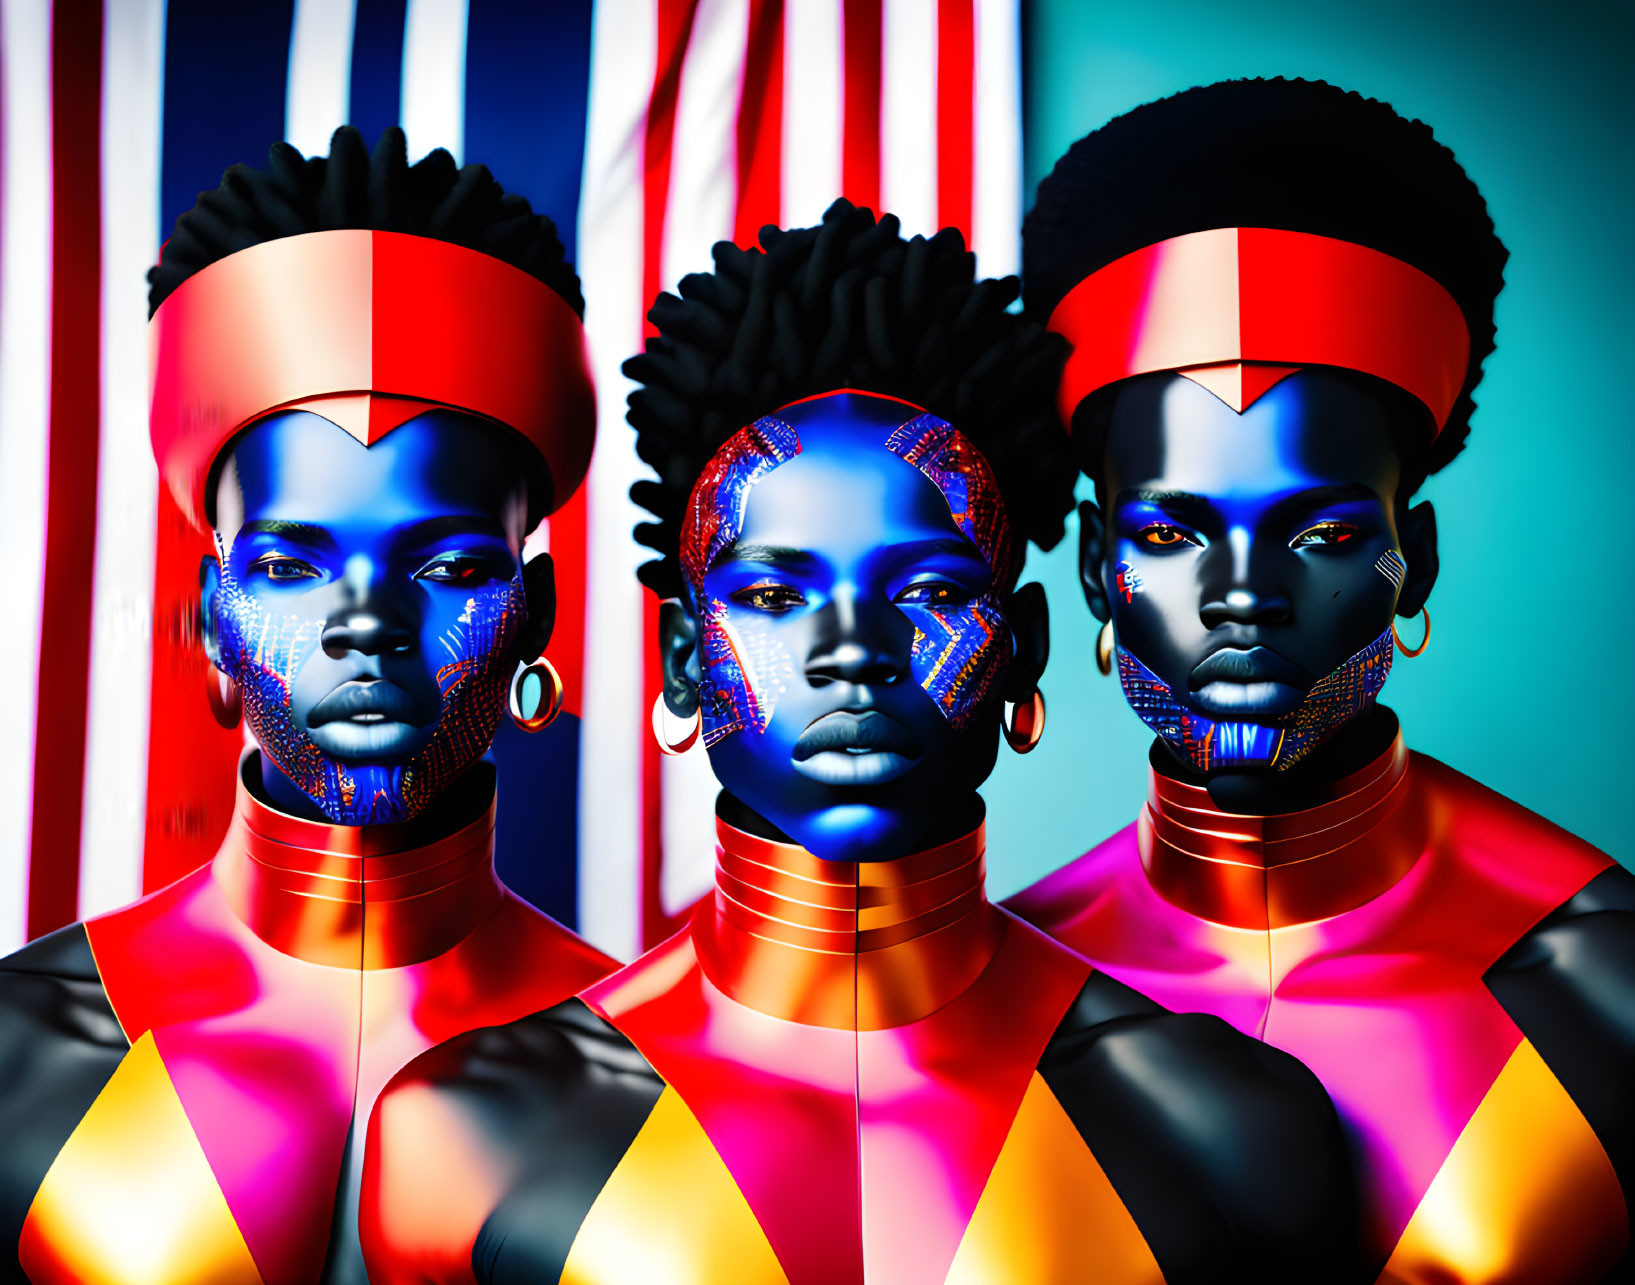 Vibrant body paint on stylized figures with geometric patterns against colorful flag-like stripes